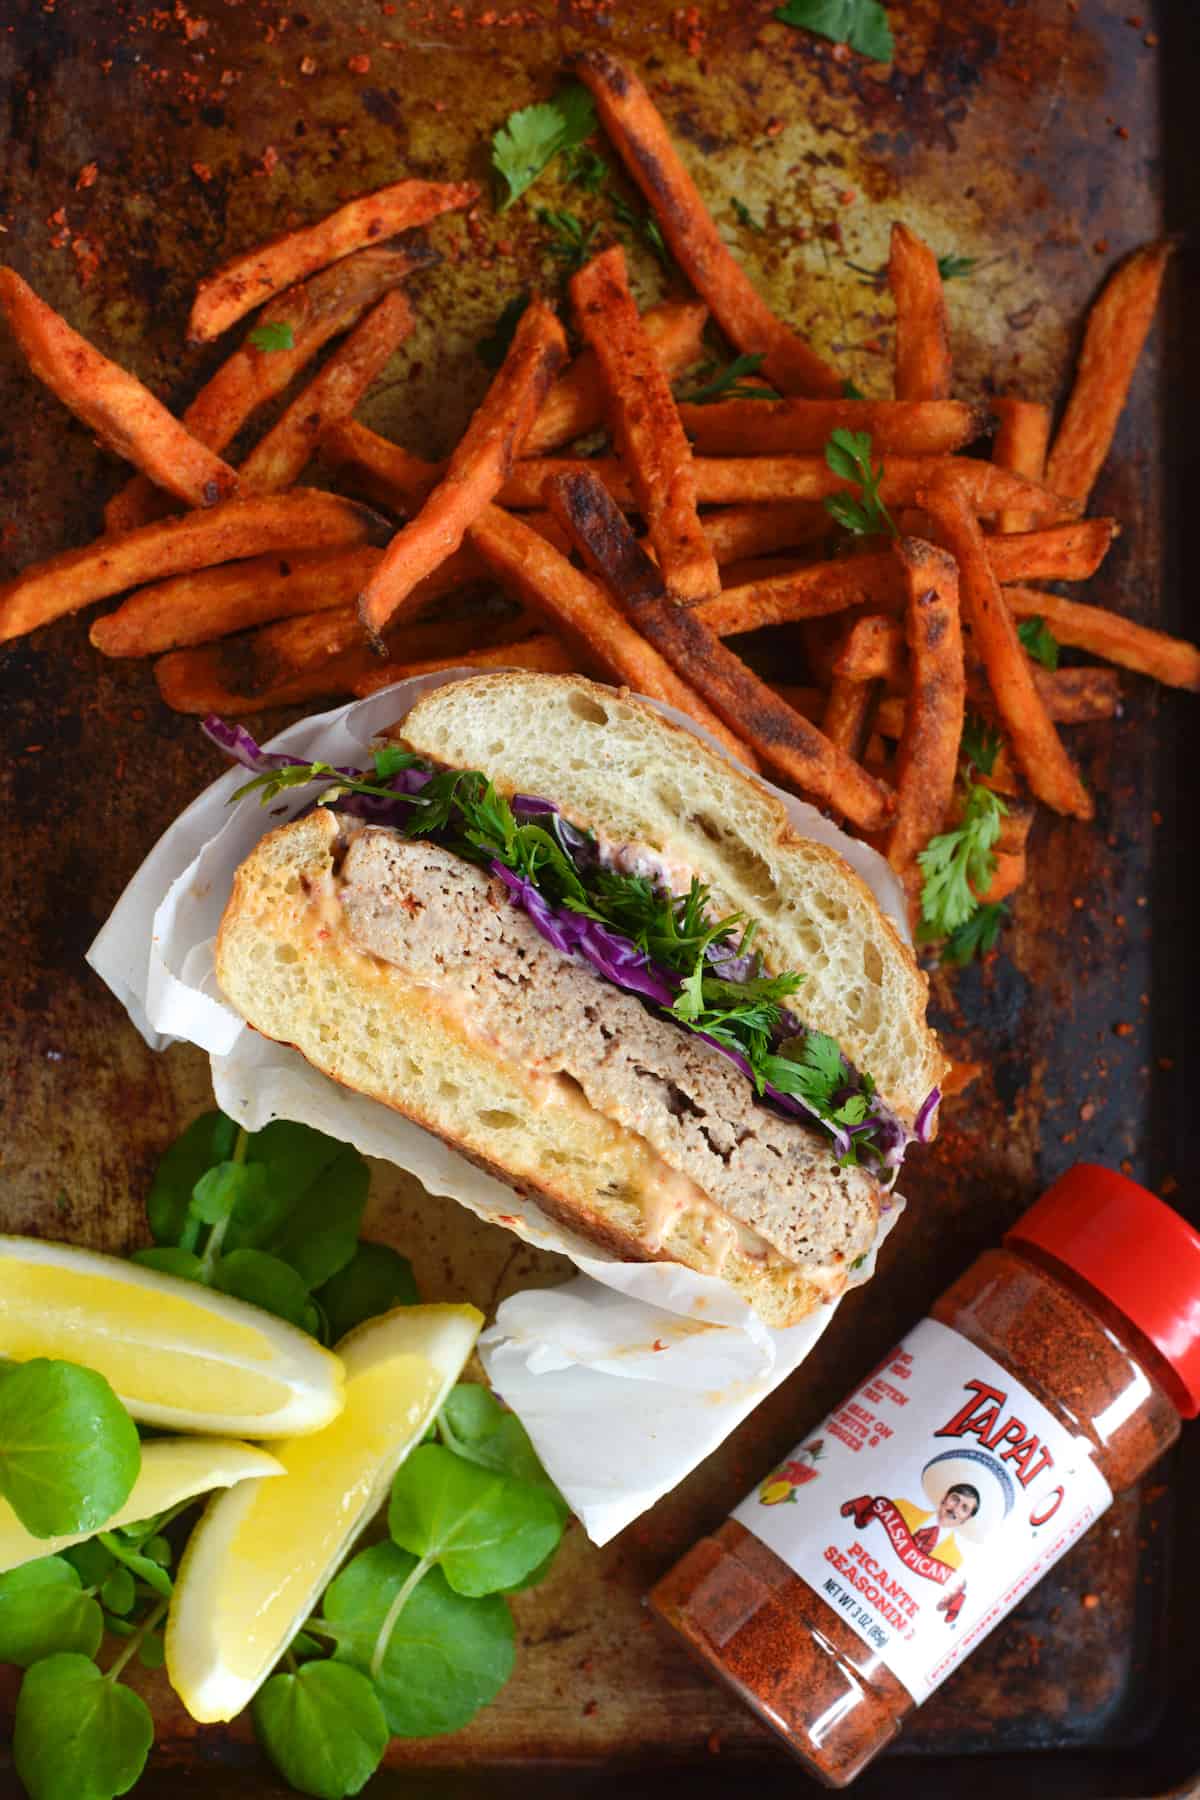 The BEST Turkey Burger recipe! This one is anything but boring, seasoned with Tapatio hot sauce, a simple spice blend, and Worcestershire with a little spicy mayo on top to boot. Serve the turkey burger with sweet potato fries and a simple Cilantro-Lime Slaw for an easy, healthy, and delicious dinner. #turkeyburgerrecipe #turkeyburger #spicyturkeyburger #tapatio